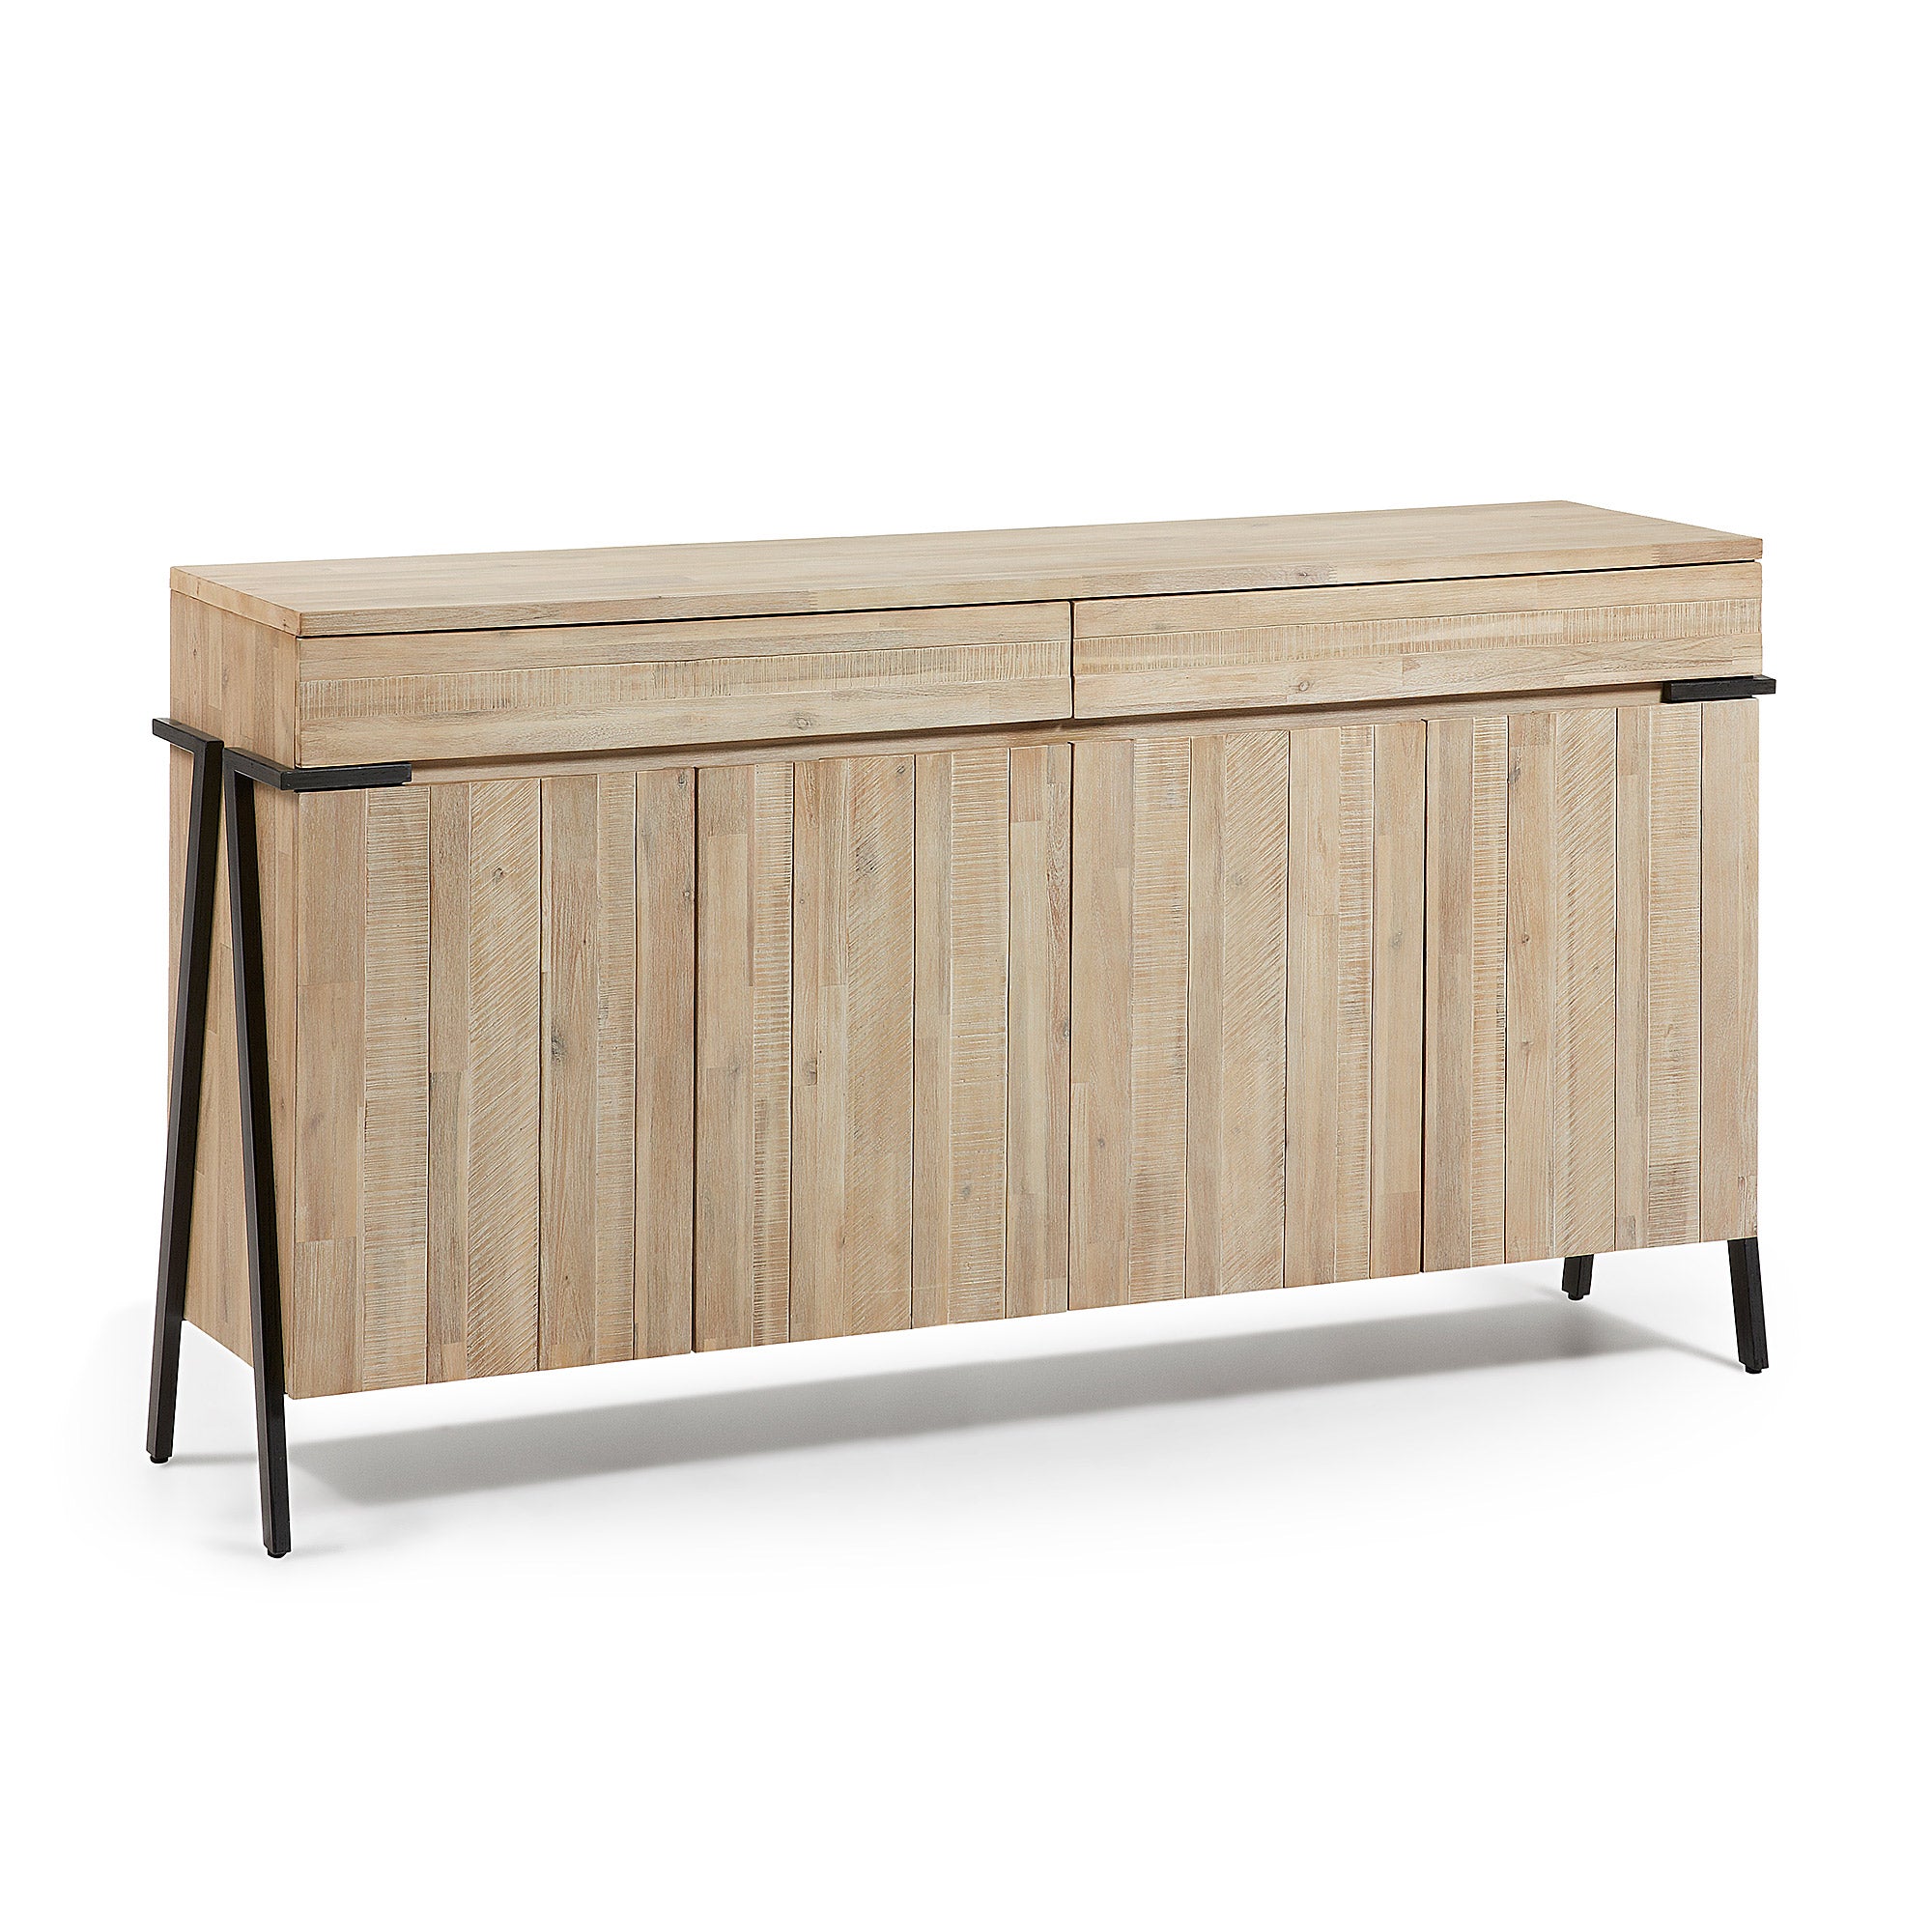 Thinh solid acacia wood sideboard 4 doors 2 drawers with black finish steel, 184 x 98 cm